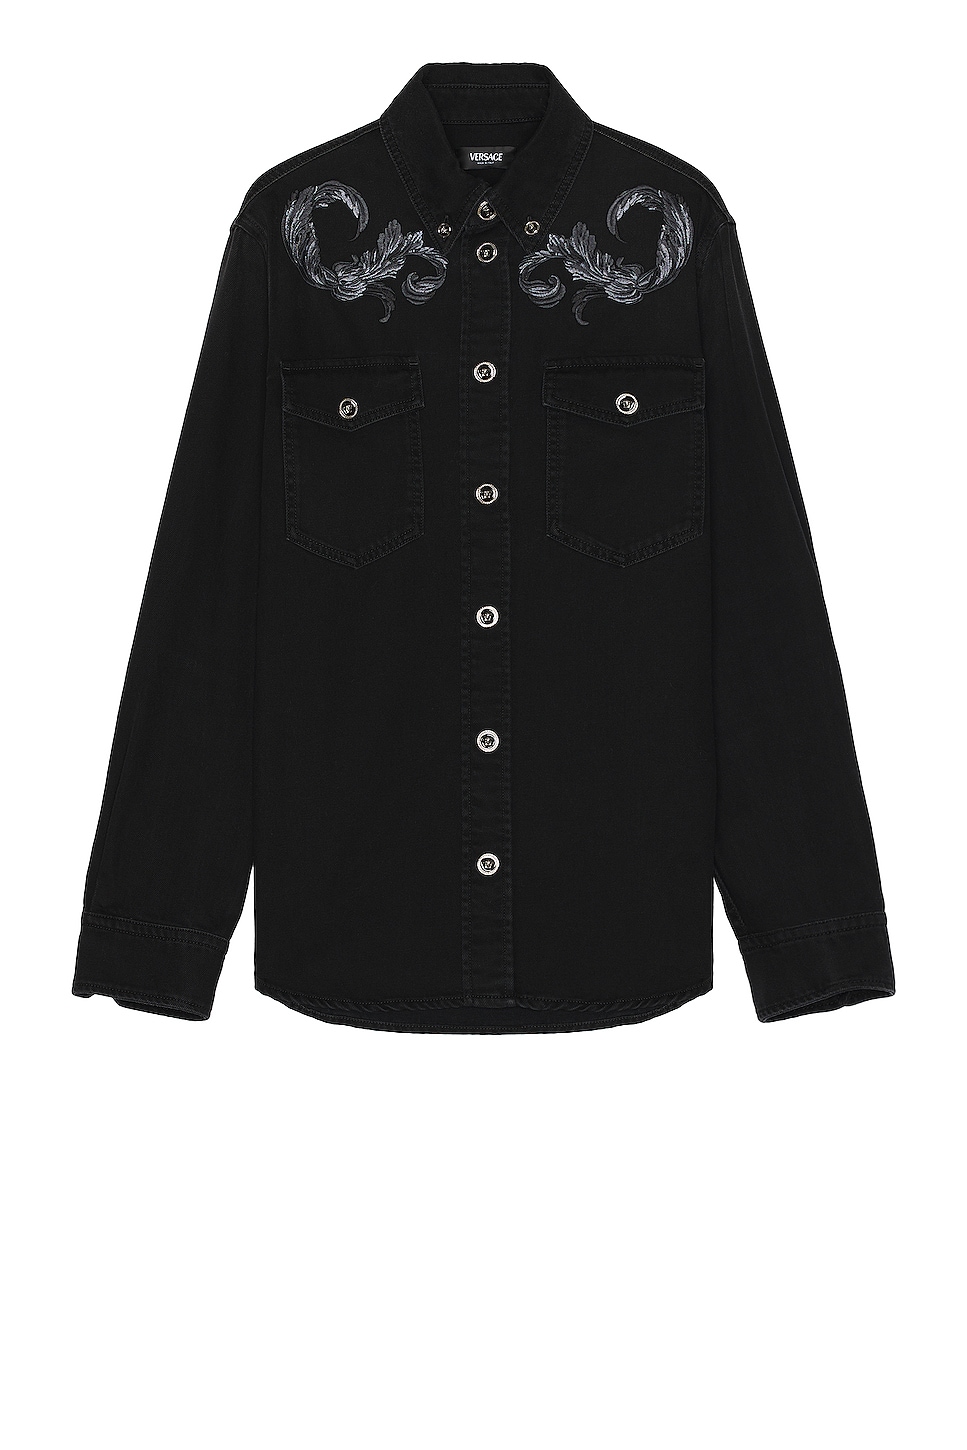 Image 1 of VERSACE Denim Shirt in Faded Washed Black